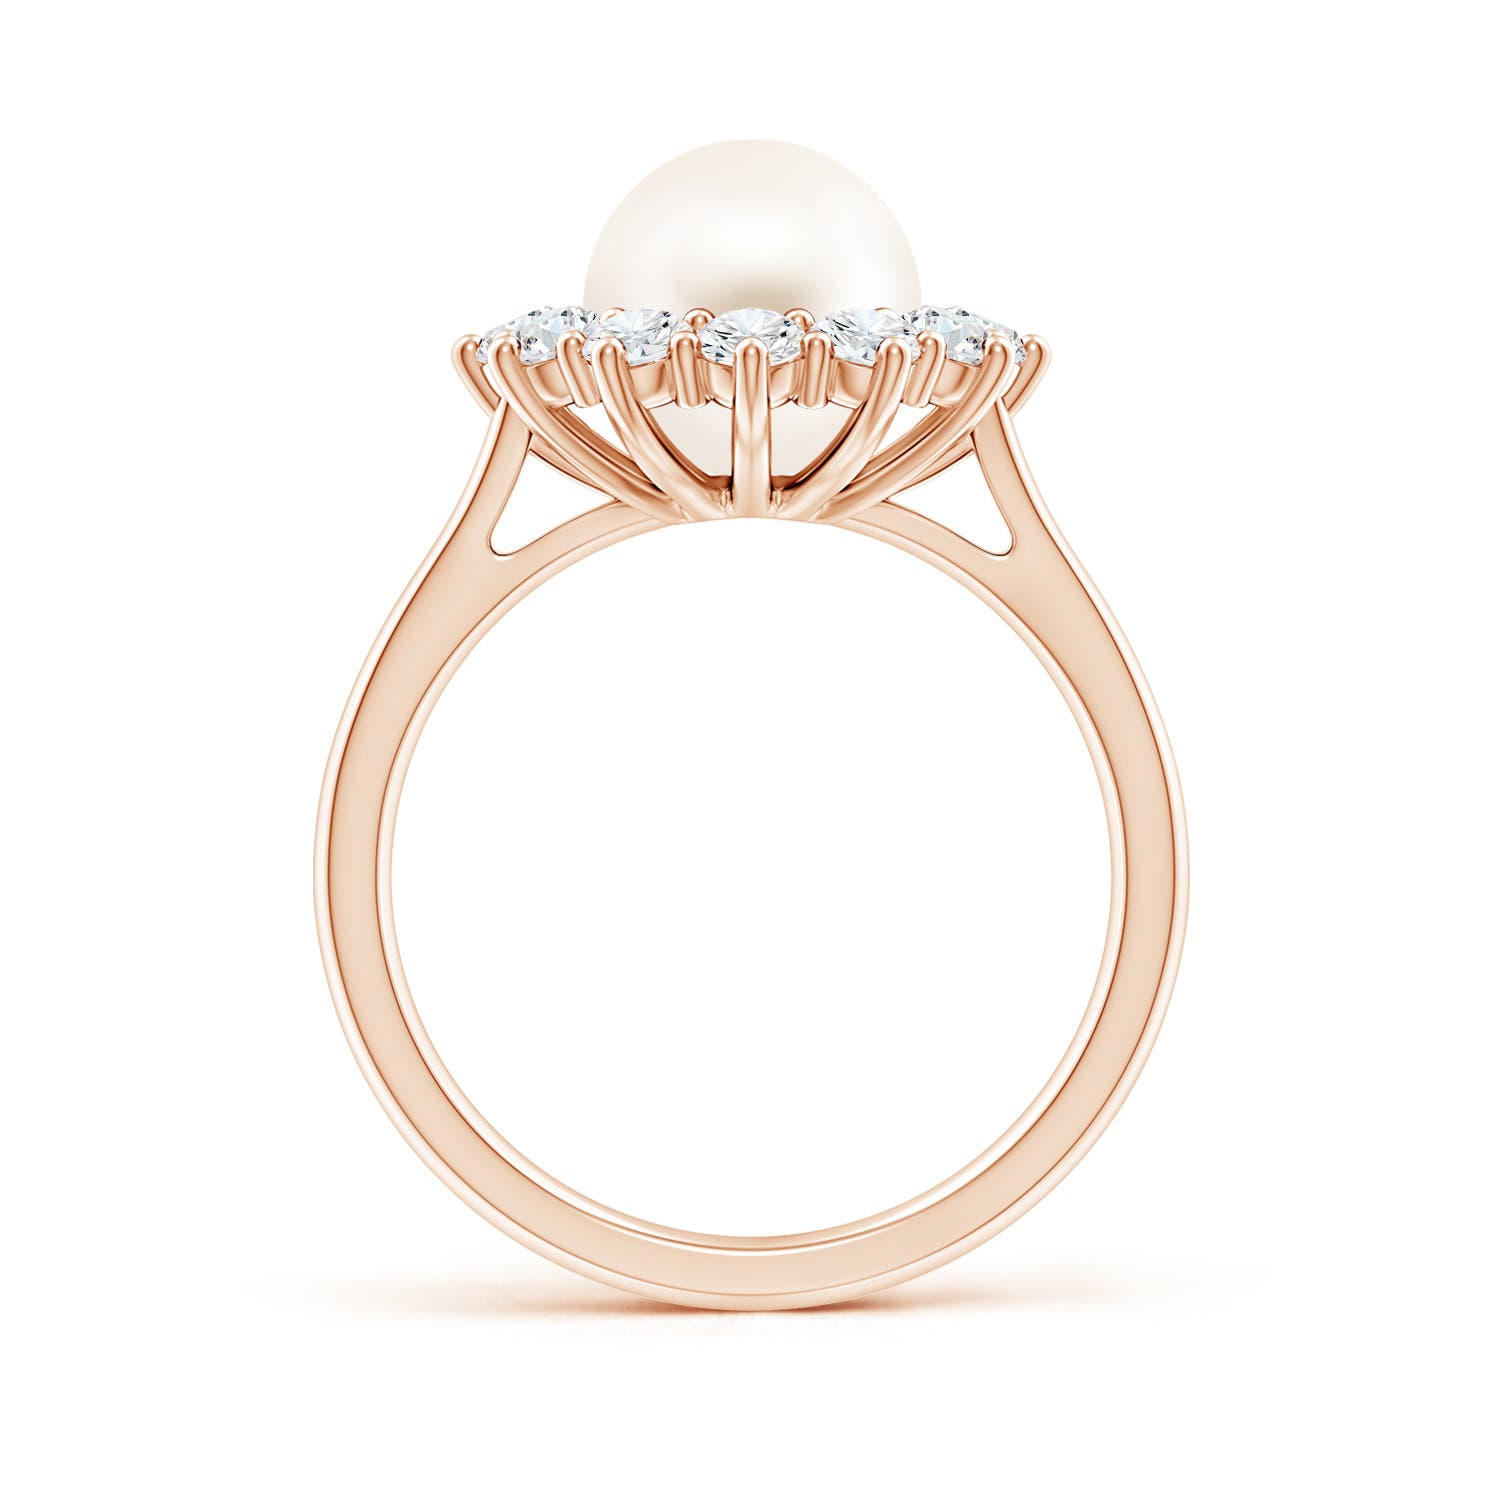 AAA / 4.4 CT / 14 KT Rose Gold